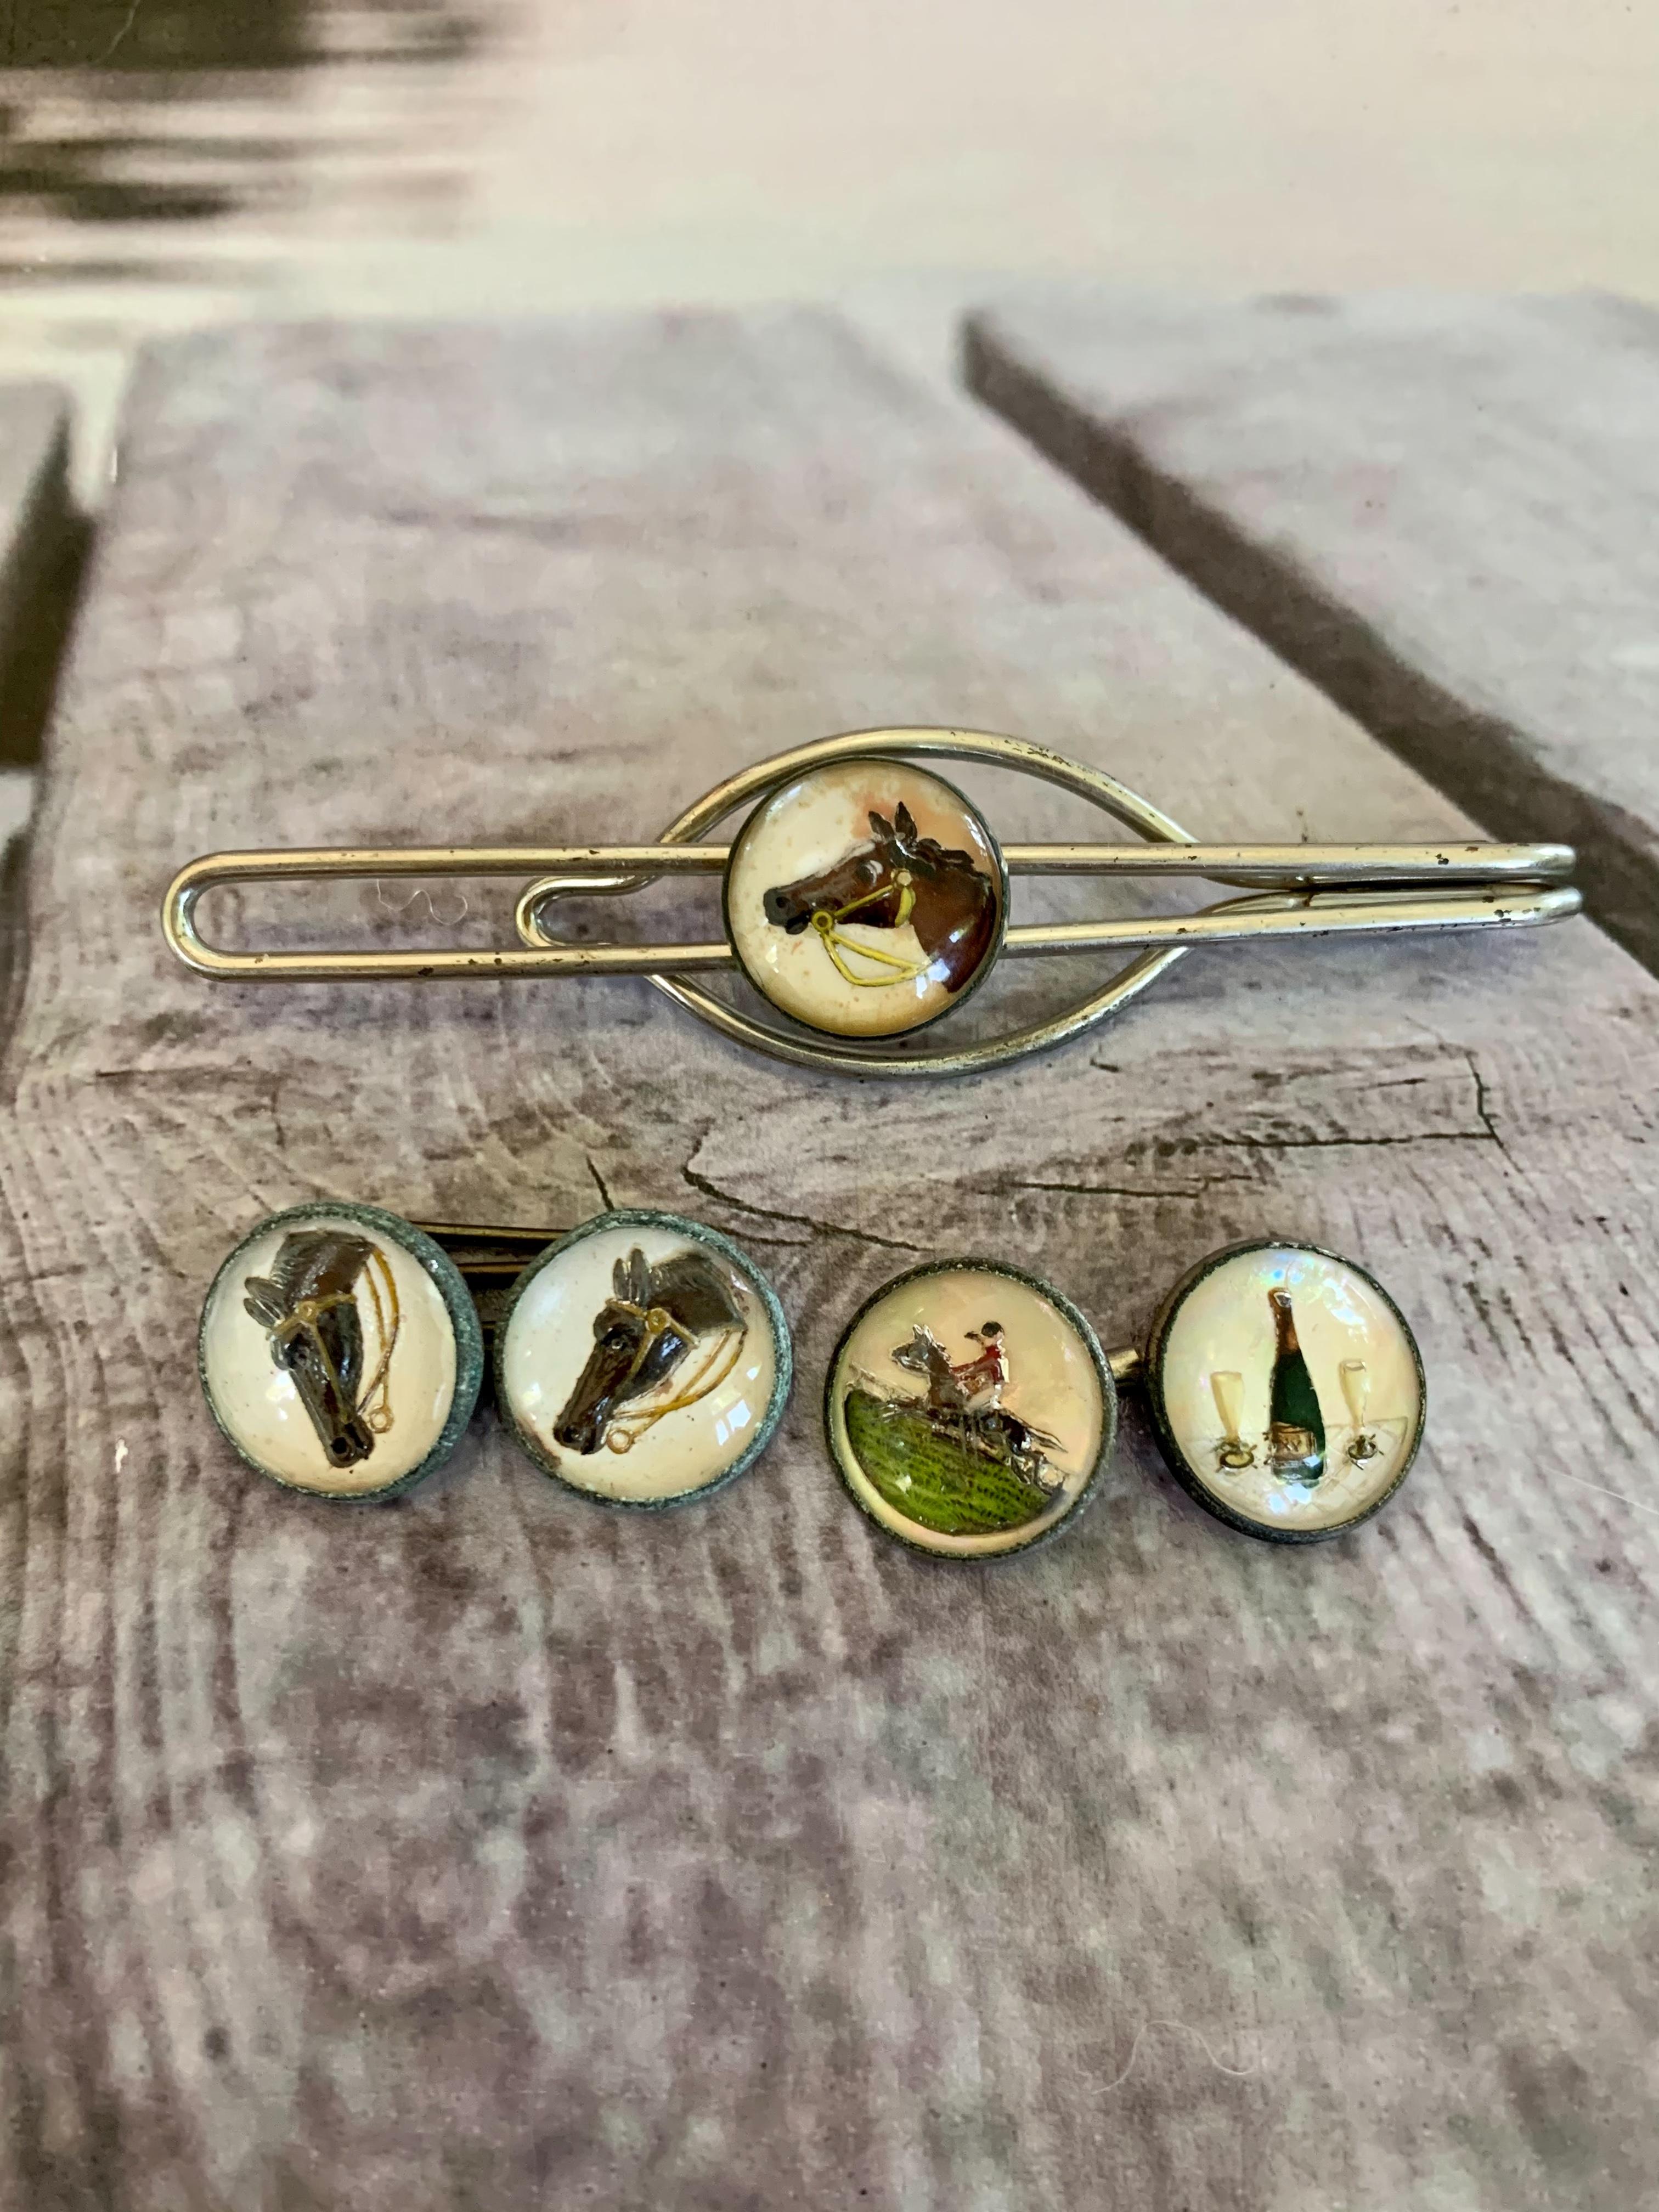 vintage cufflinks and tie clips